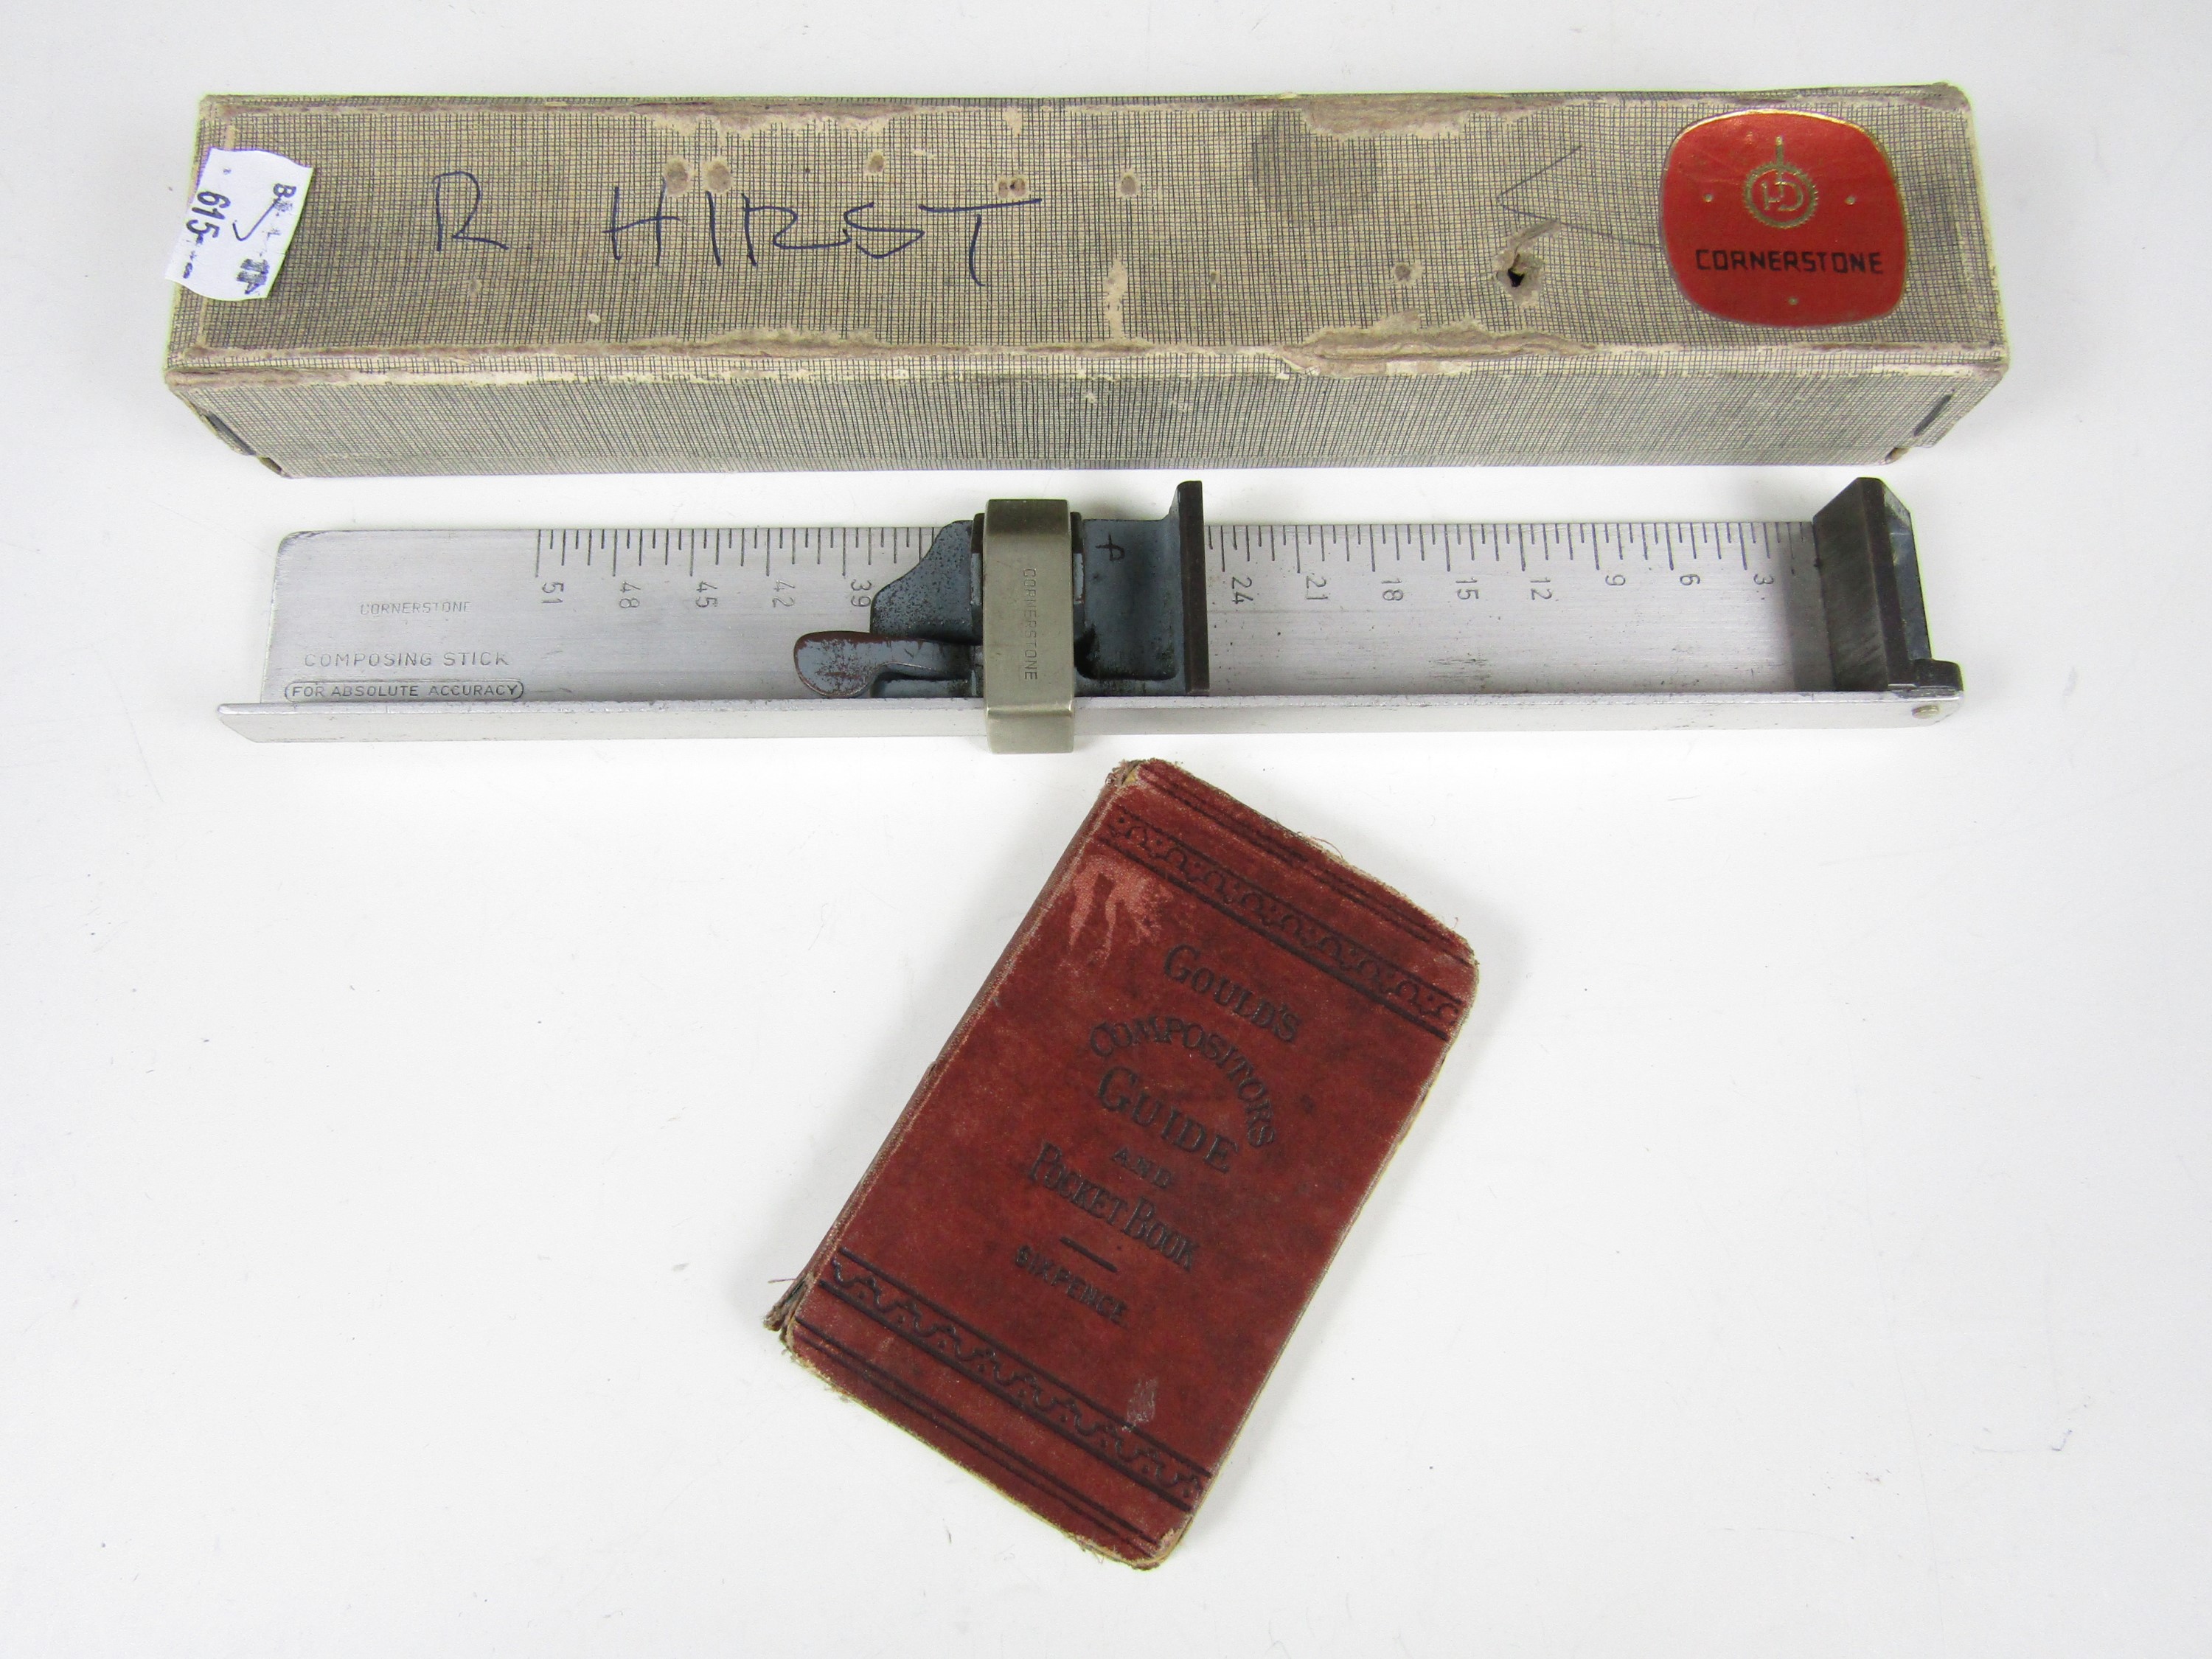 A Victorian copy of Gould's Compositors Guide and Pocket Book, 1878, together with a mid 20th